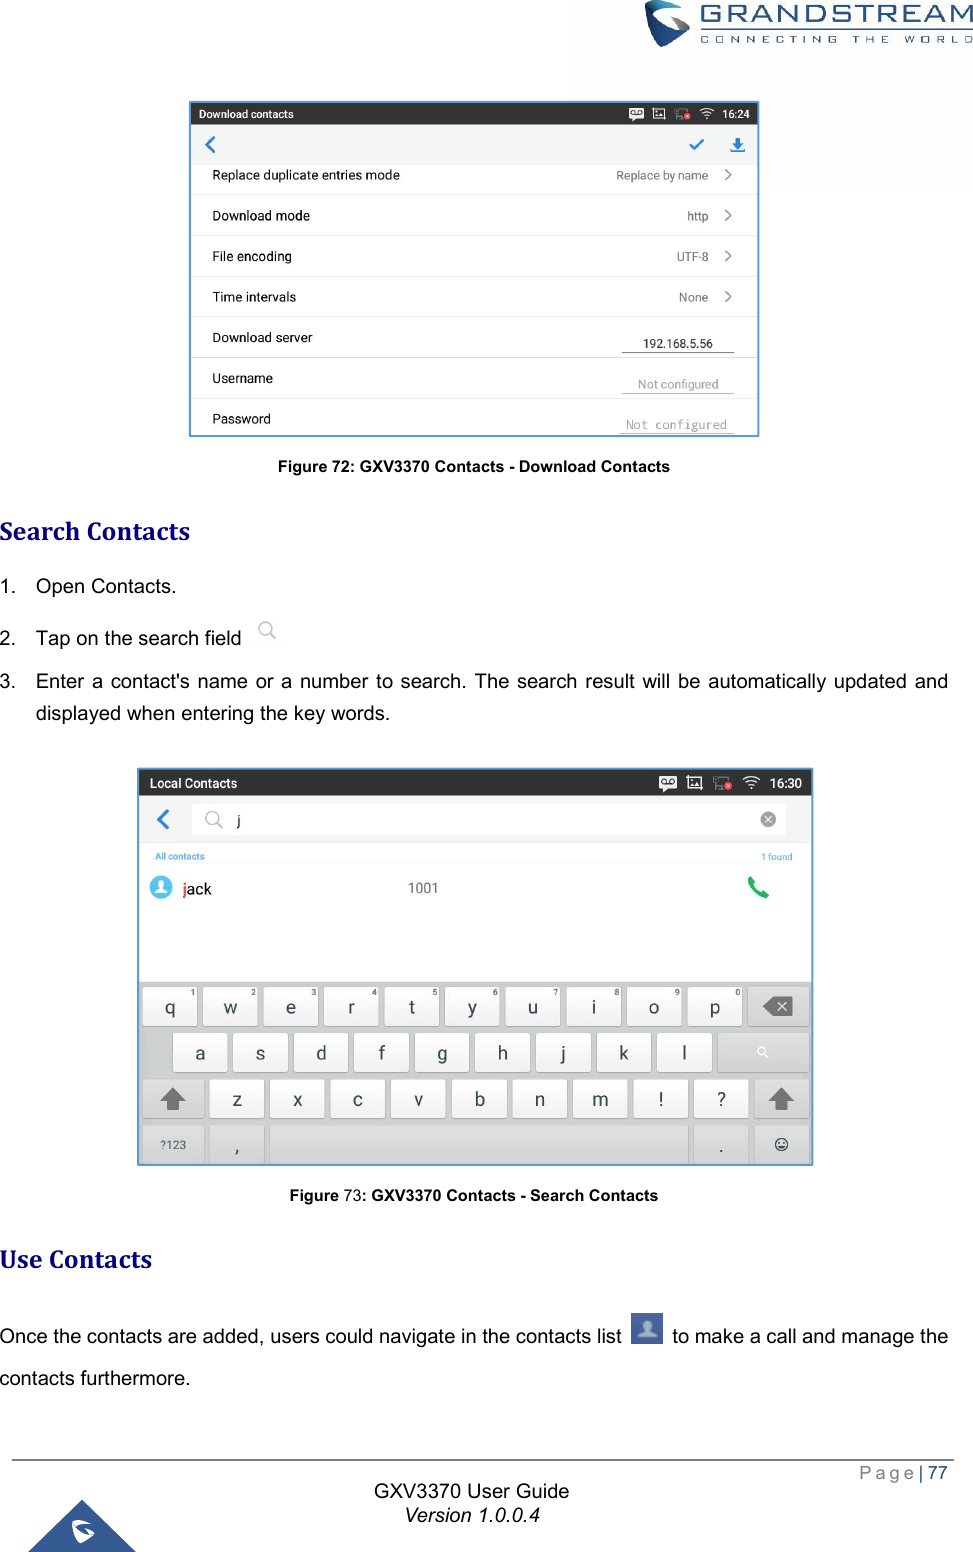  Page| 77  GXV3370 User Guide Version 1.0.0.4   Figure 72: GXV3370 Contacts - Download Contacts Search Contacts 1. Open Contacts. 2. Tap on the search field   3. Enter a contact&apos;s name or a number to search. The search result will be automatically updated and displayed when entering the key words.   Figure 73: GXV3370 Contacts - Search Contacts Use Contacts Once the contacts are added, users could navigate in the contacts list   to make a call and manage the contacts furthermore. 